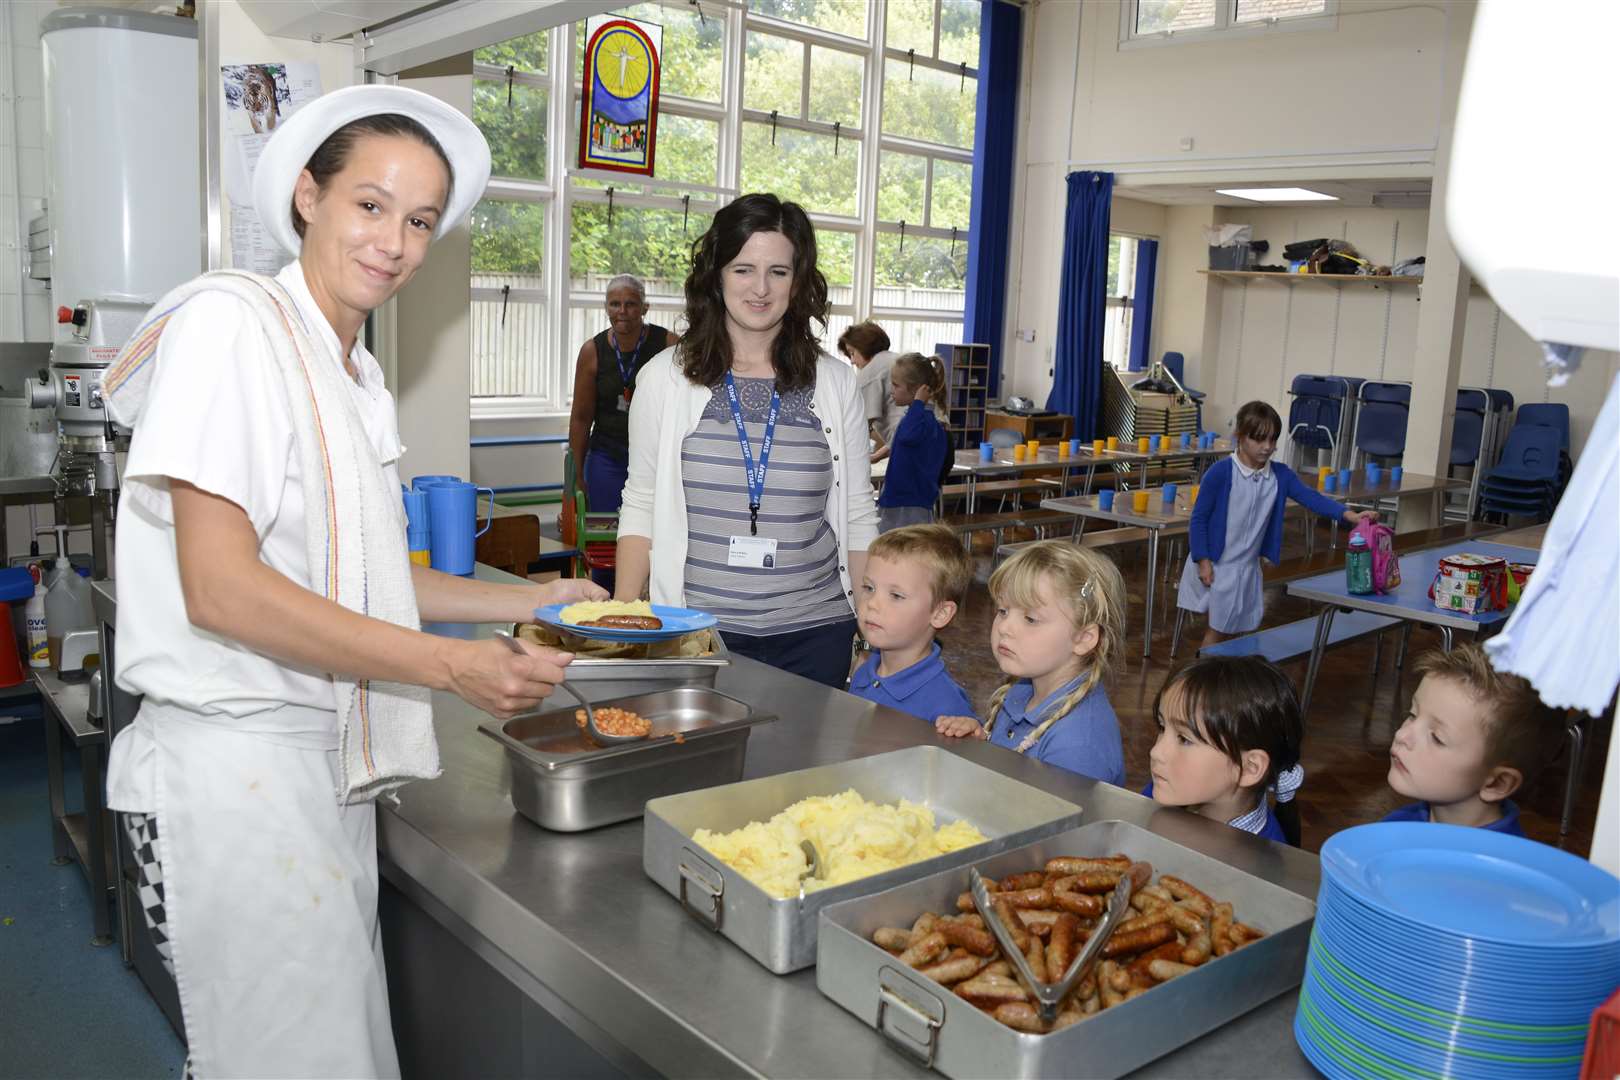 Whole School Meals celebrate 10 years of serving school dinners. Pictured with cook Vikki Boyce serving up lunch